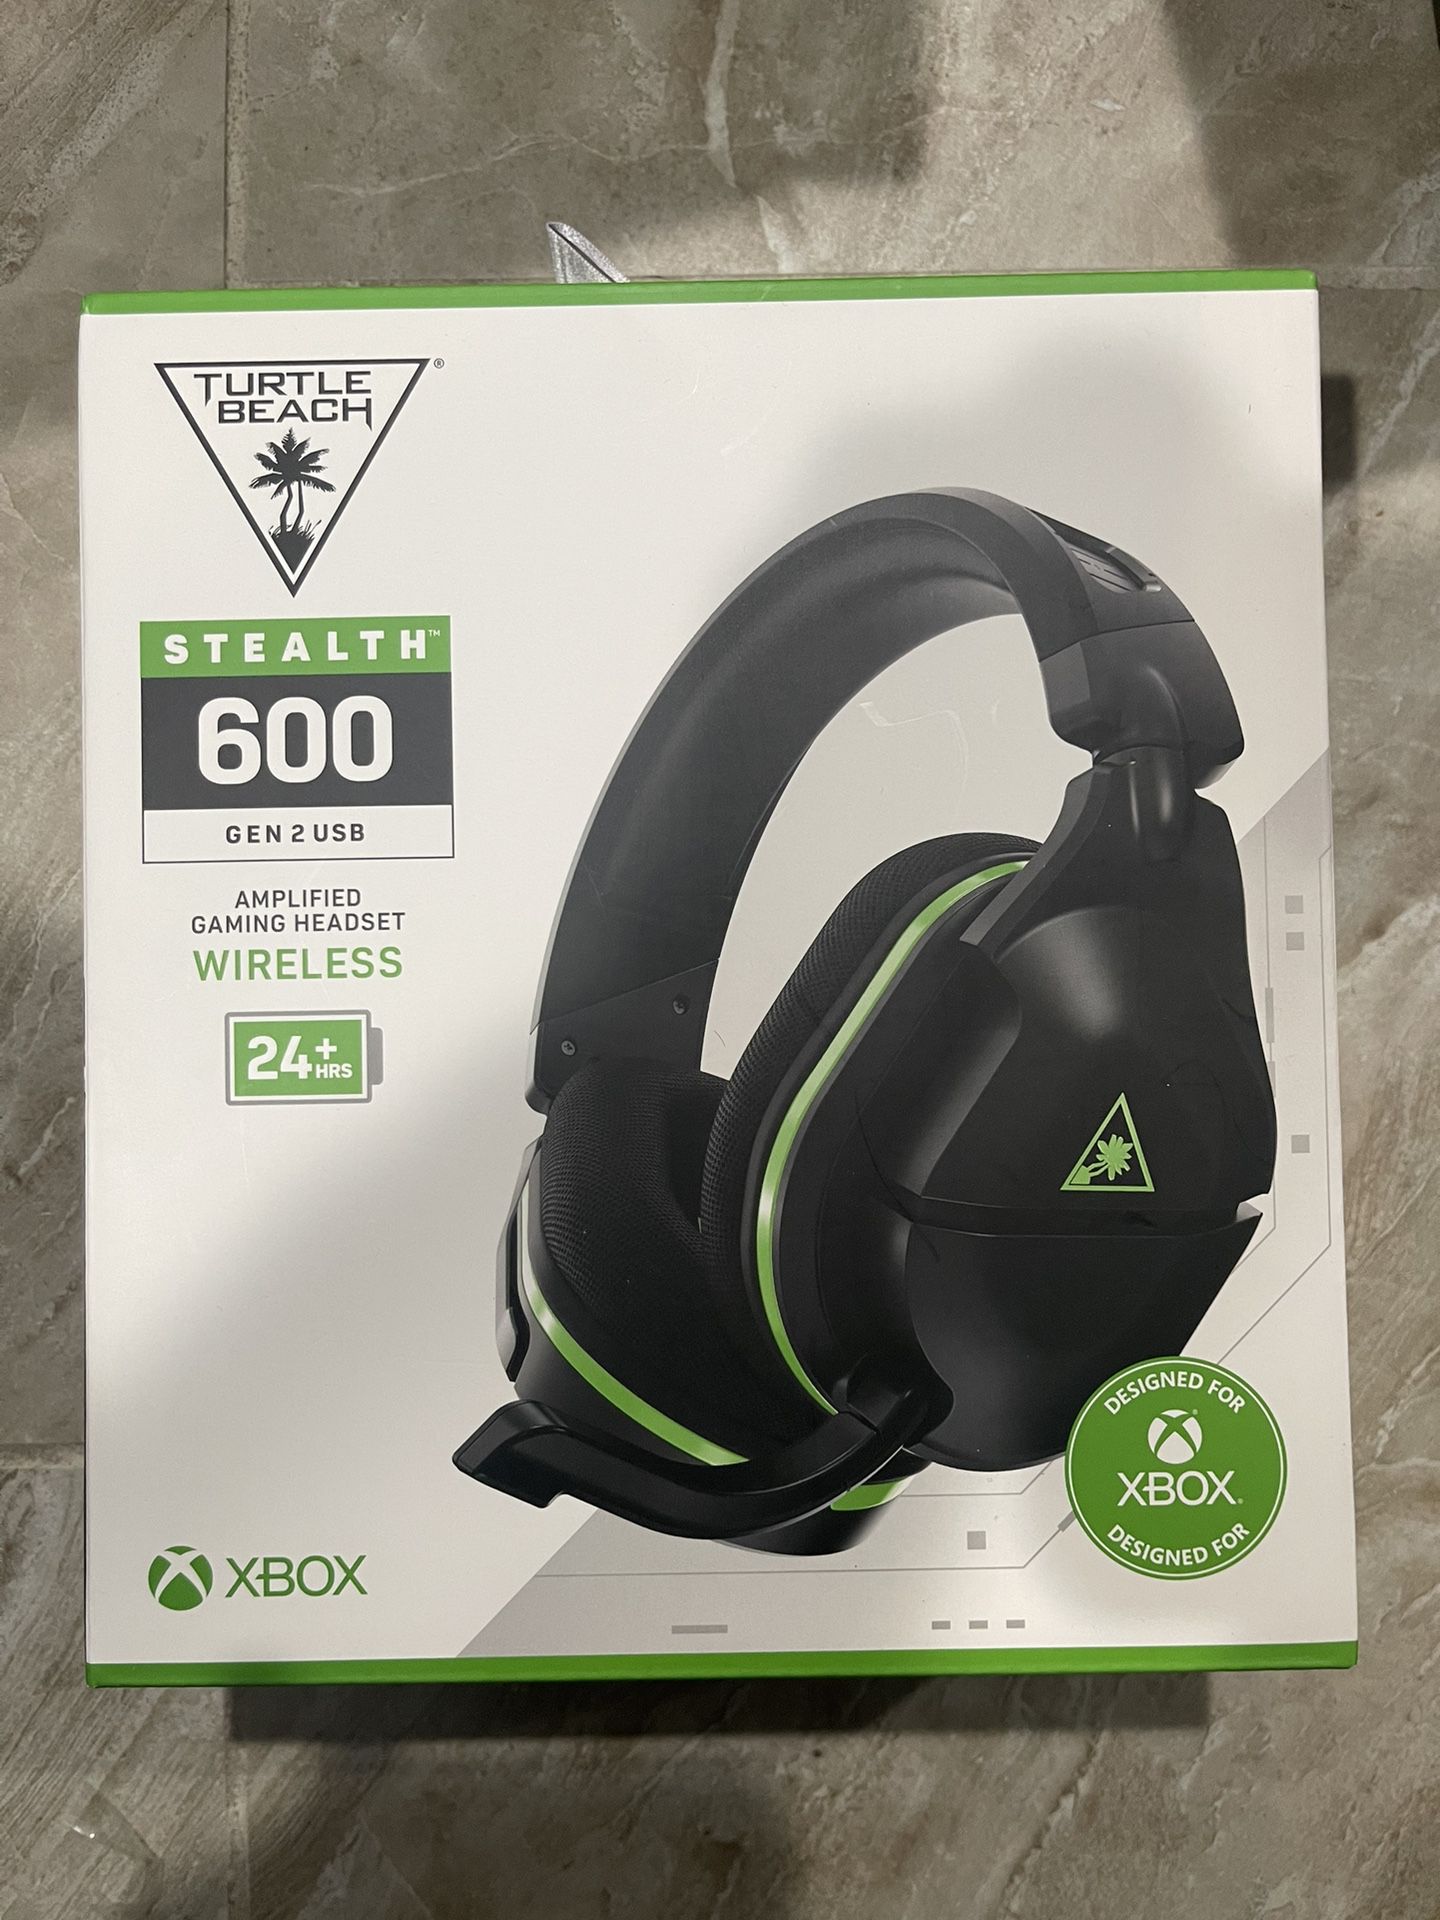 Turtle Beach Stealth 600 Gen 2 USB Wireless Amplified Gaming Headset - Licensed for Xbox Series X, Xbox Series S, & Xbox One - 24+ Hour Battery, 50mm 